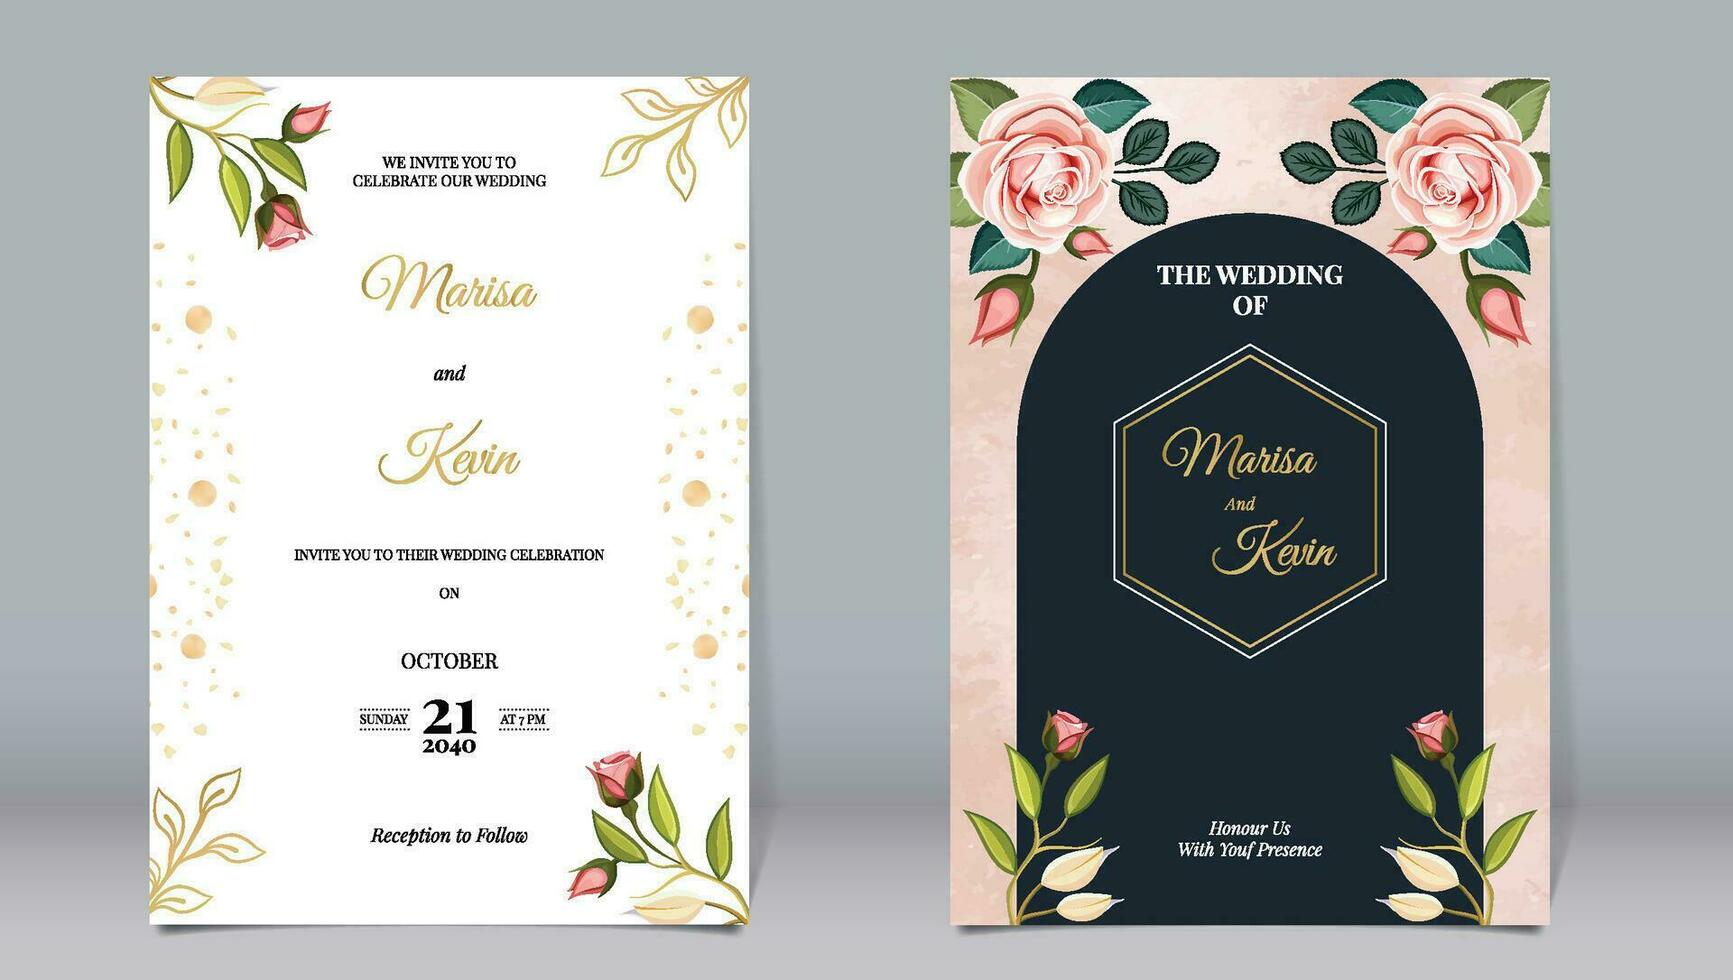 Luxury wedding invitation pink rose flowers and gold polygon elements decorate with watercolor background vector